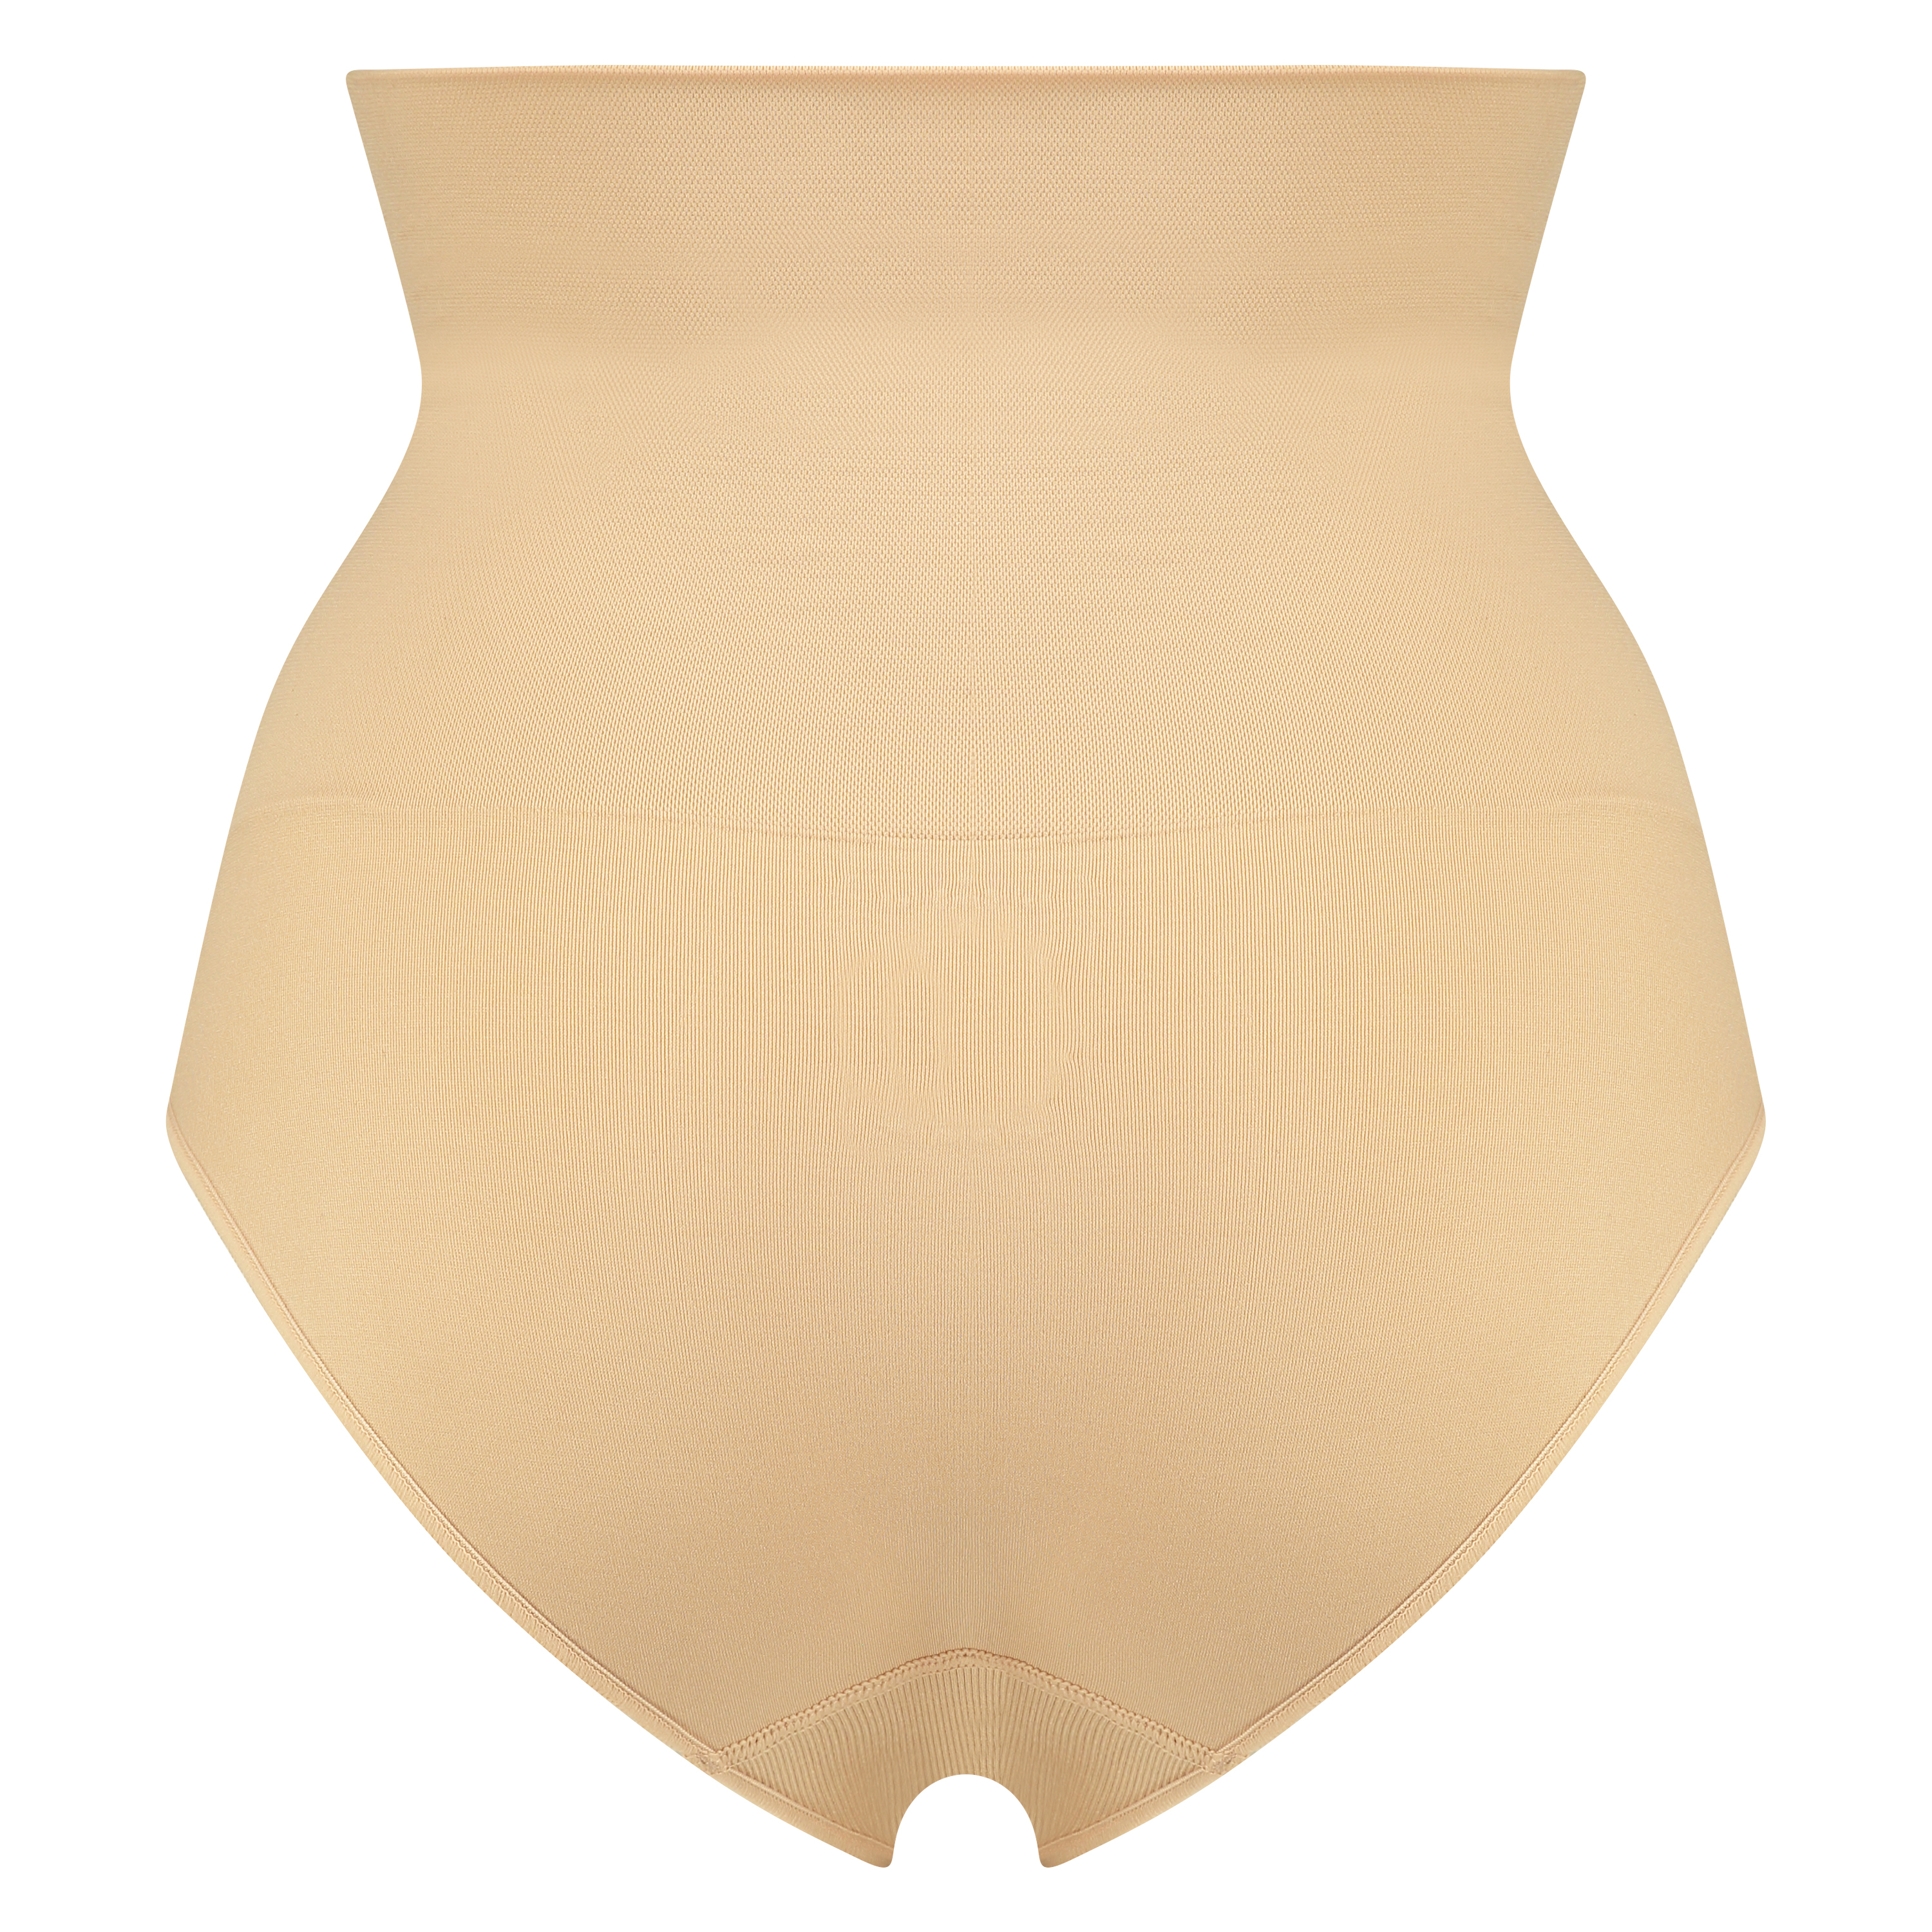 Firming high knickers - Level 2, Beige, main